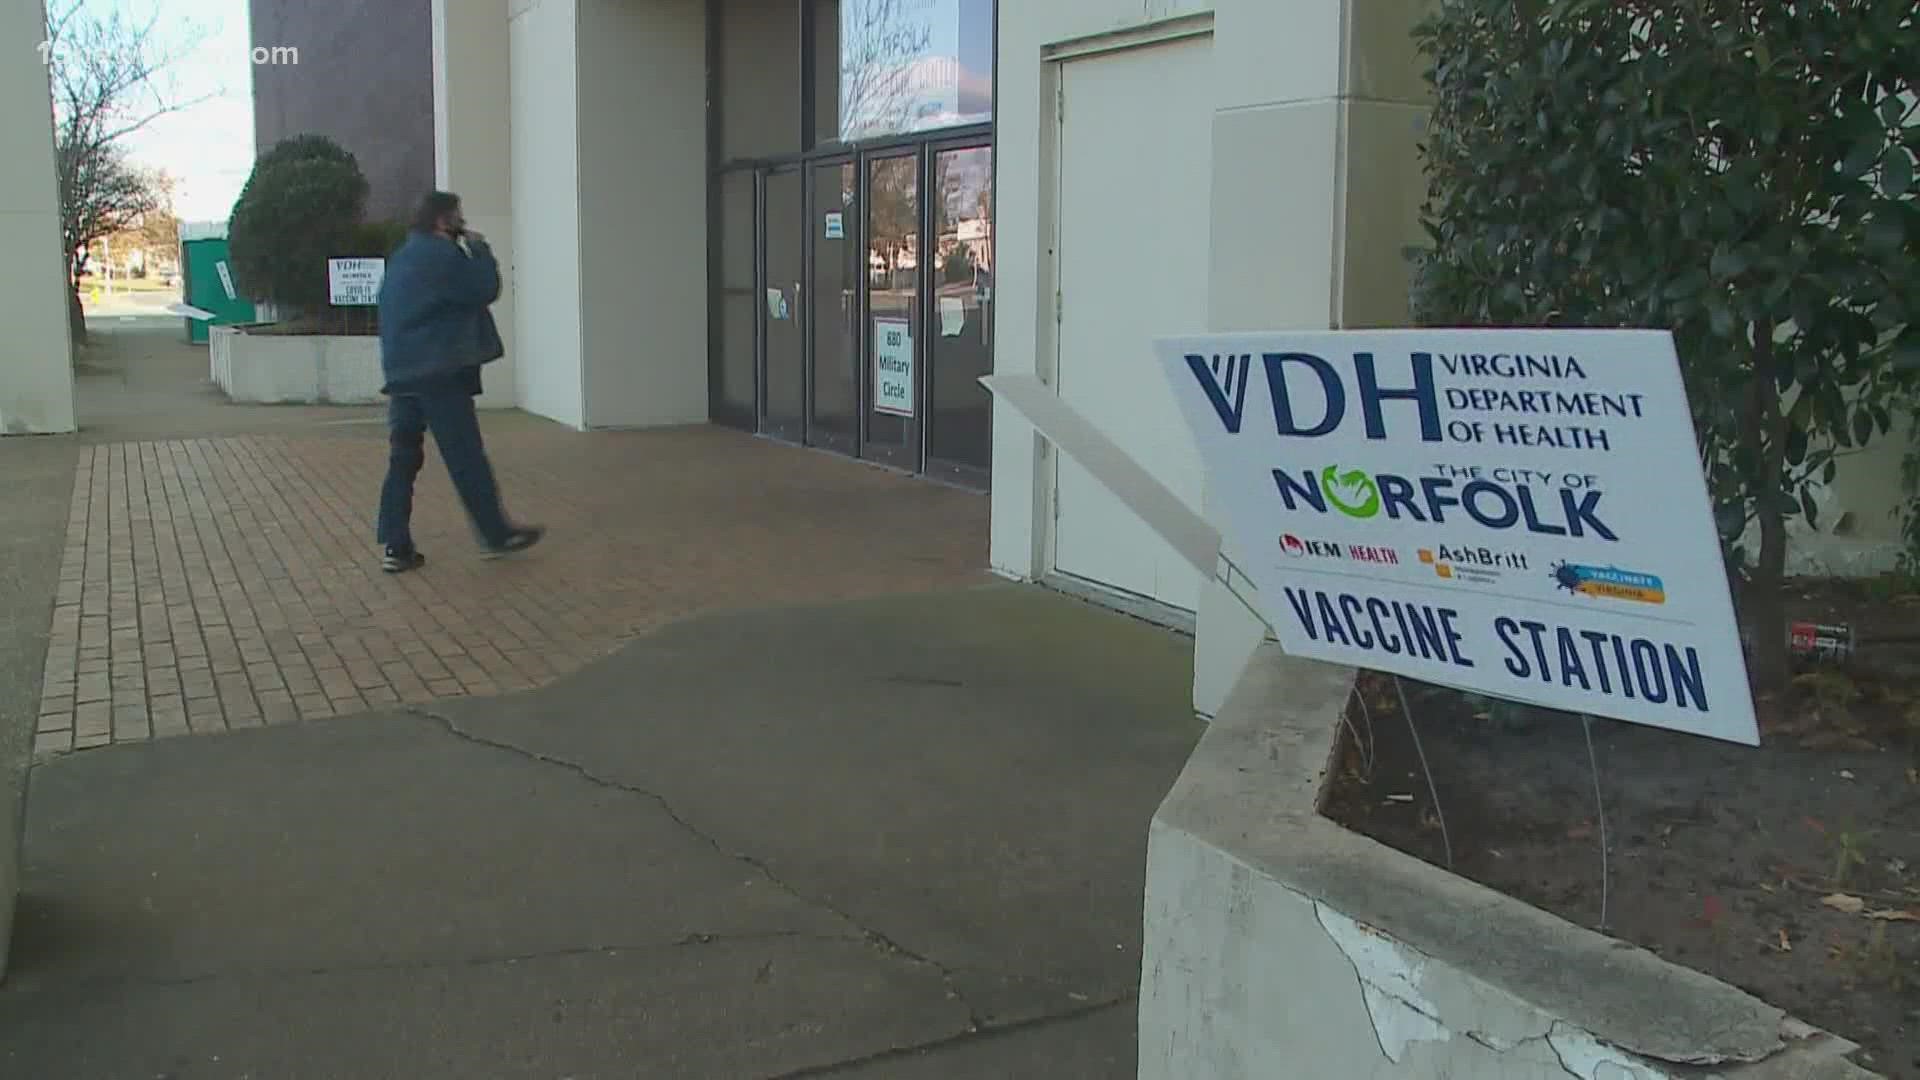 Leaders running the vaccination clinic said they typically see about 100 people getting tested every week but believe that number will expand.